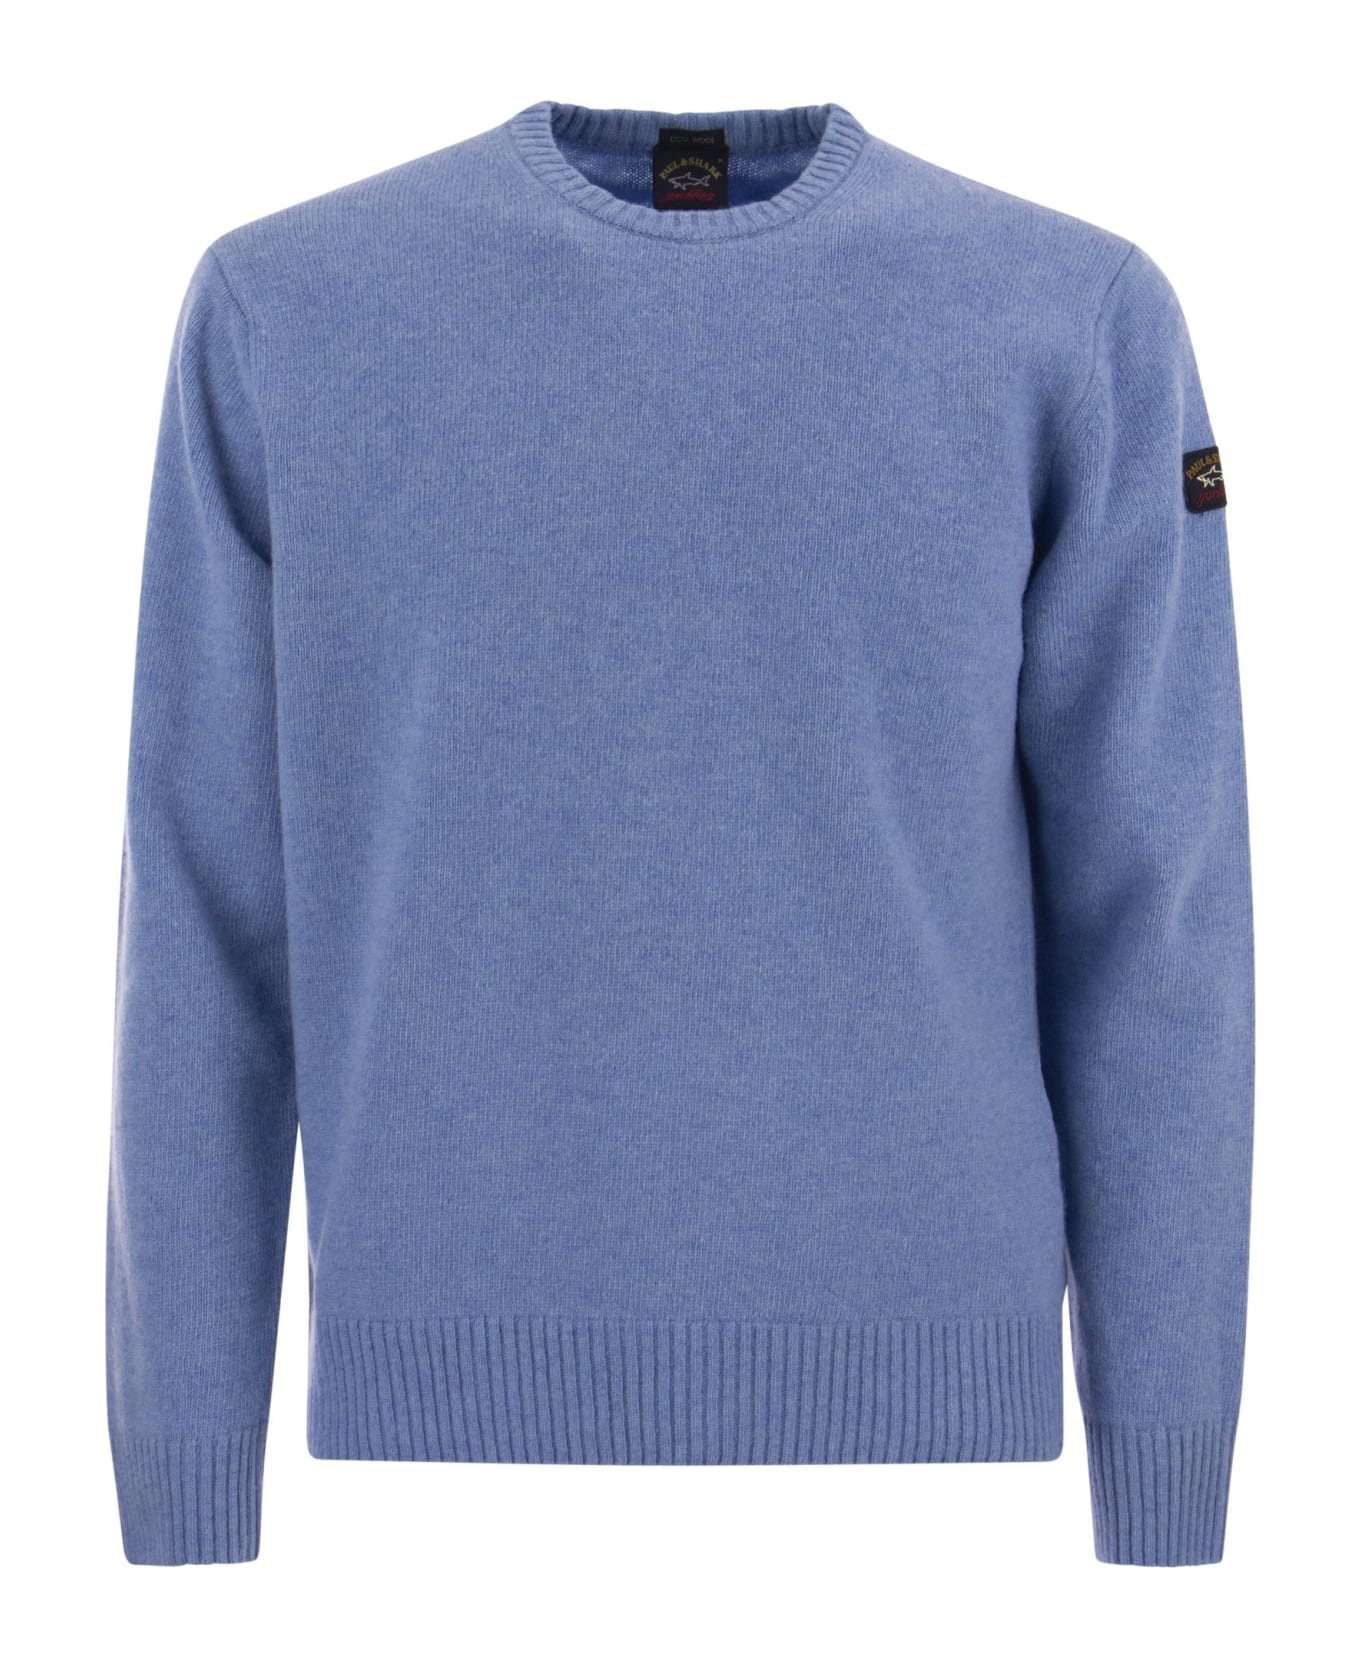 Paul&Shark Wool Crew Neck With Arm Patch - Light Blue